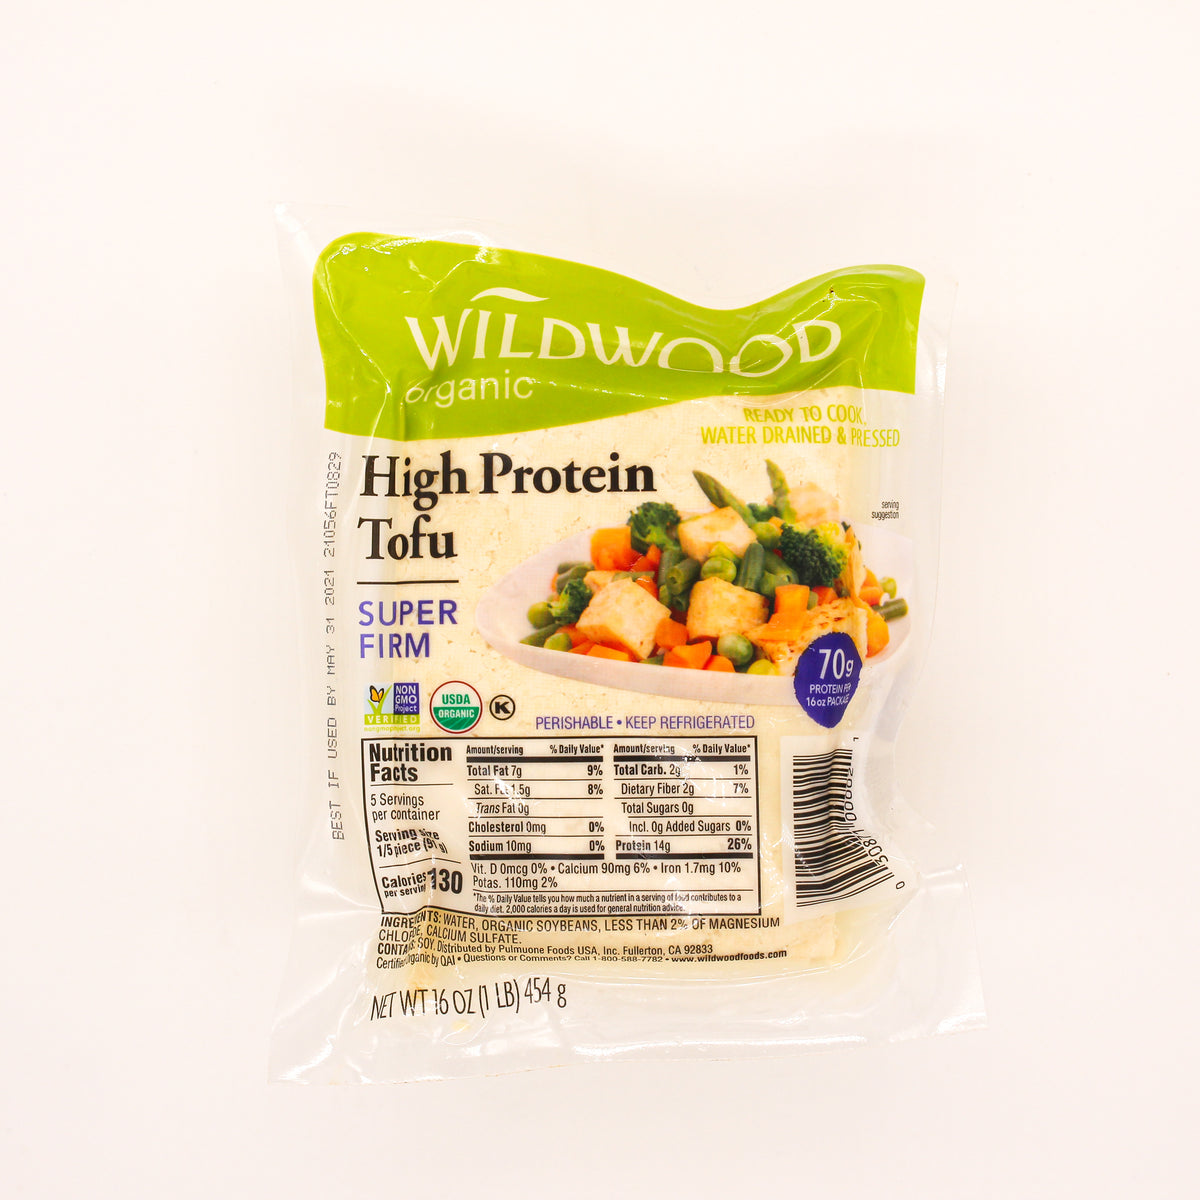 Wildwood Organic Sprouted High Protein Tofu